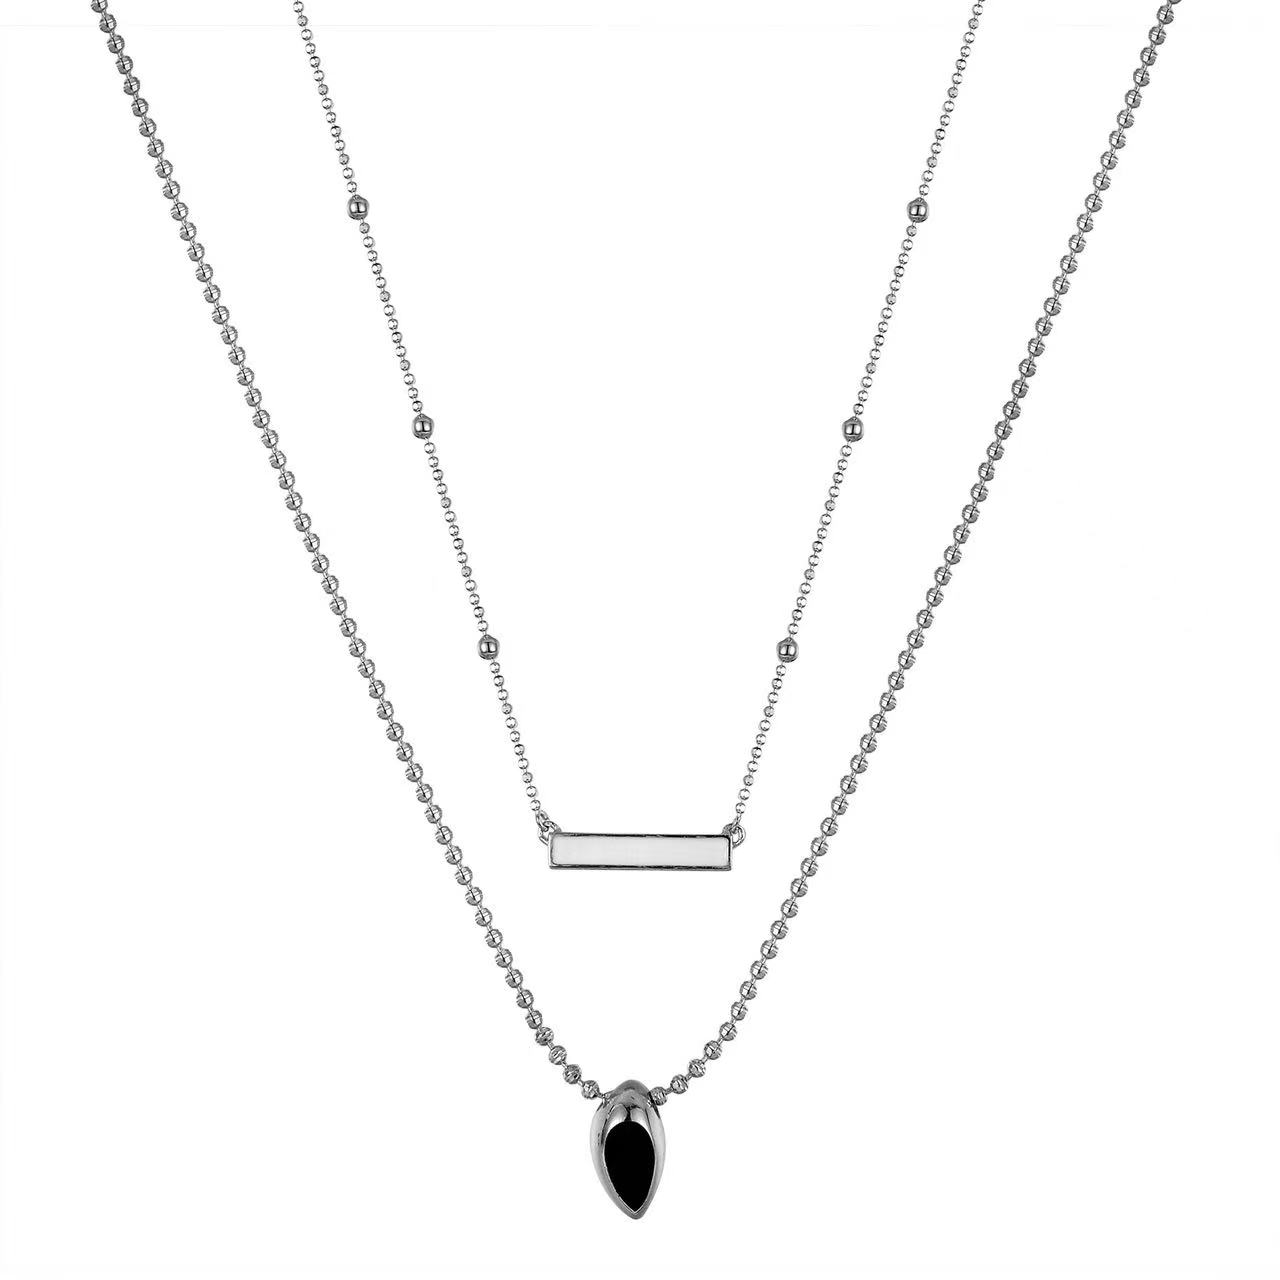 black and white necklace、silver choker necklace、dainty silver necklace